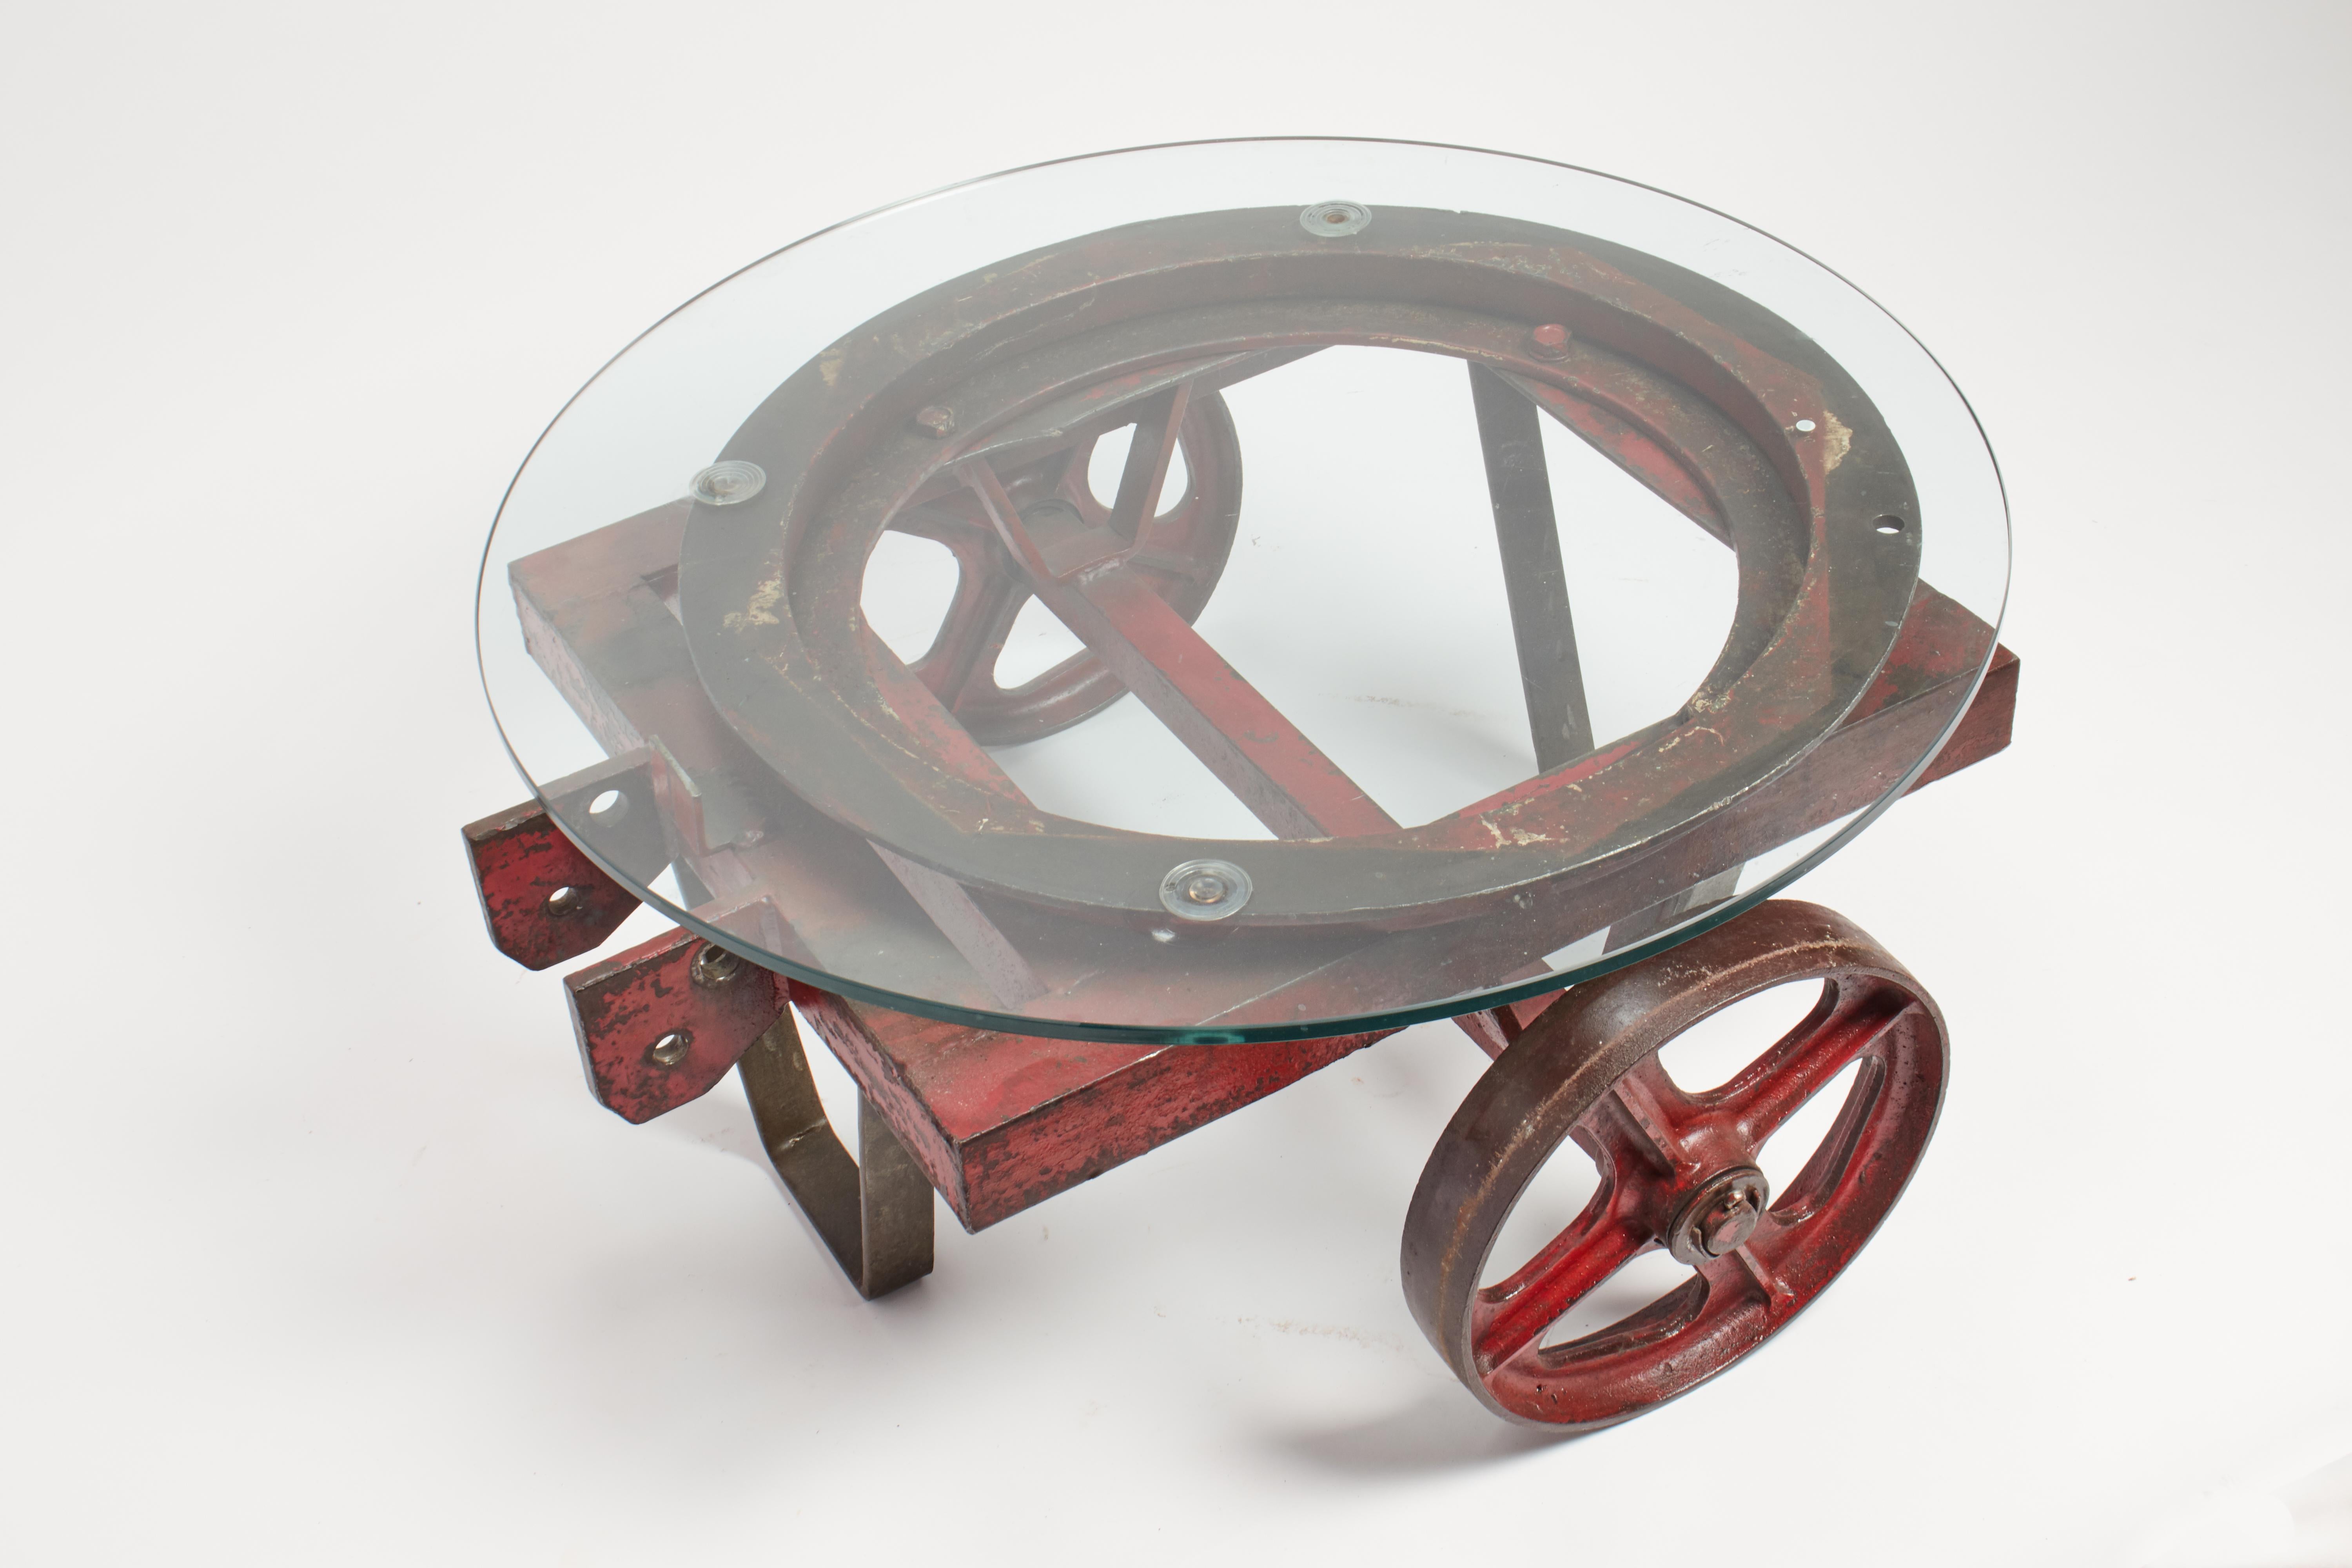 A painted iron, red color, industrial cart, with a rotating round glass base, 2 wheels. Italy 1930 ca.